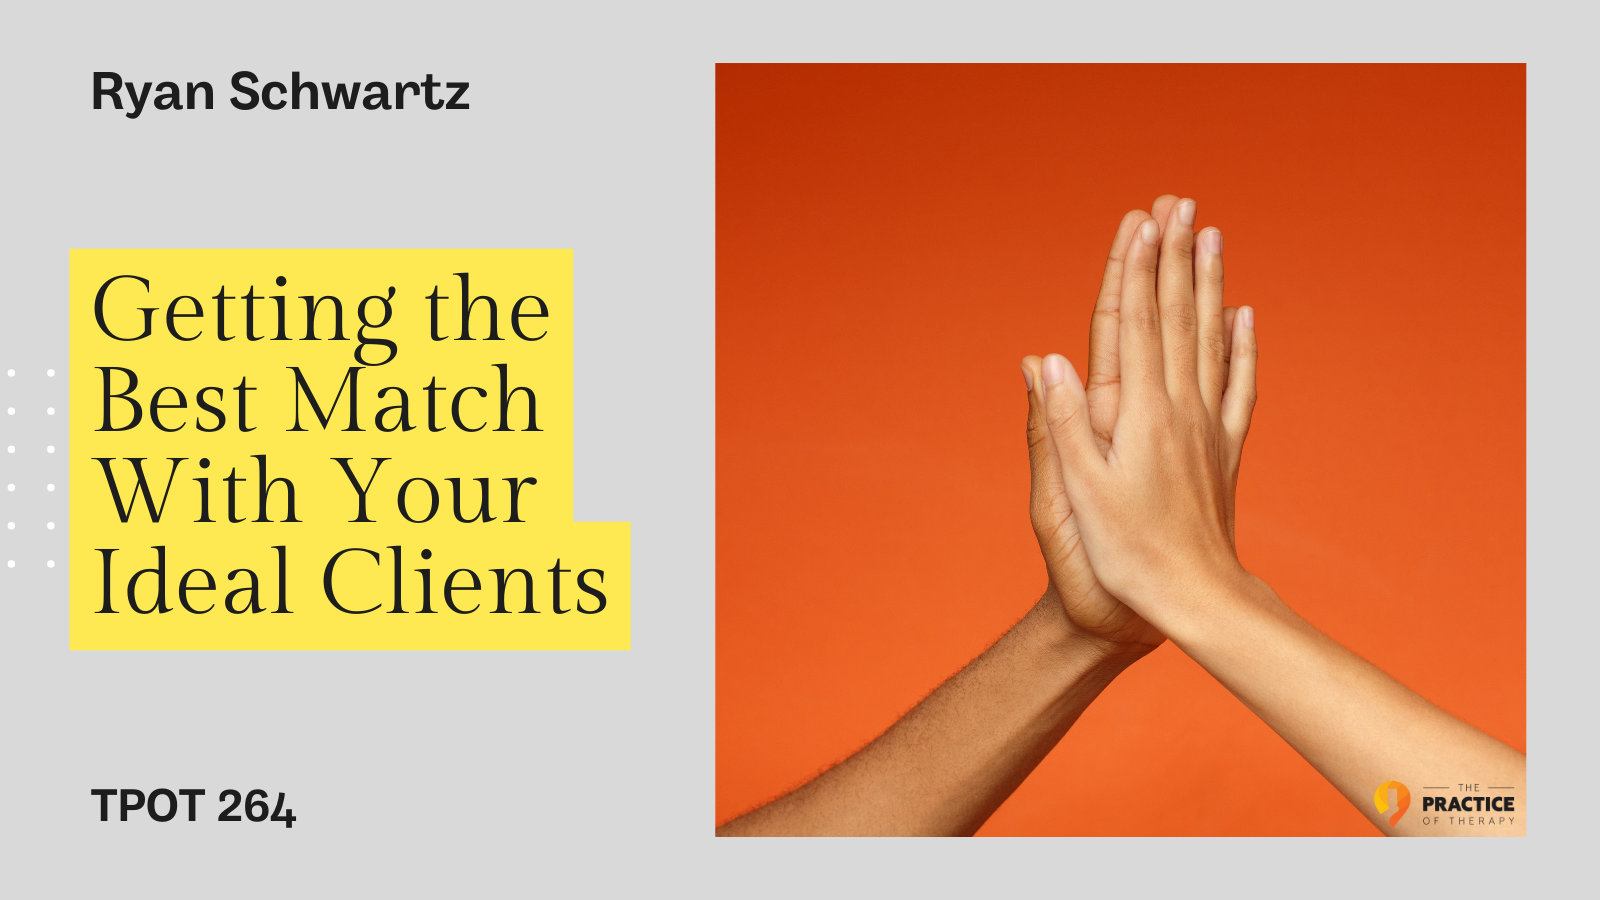 Getting the Best Match With Your Ideal Clients